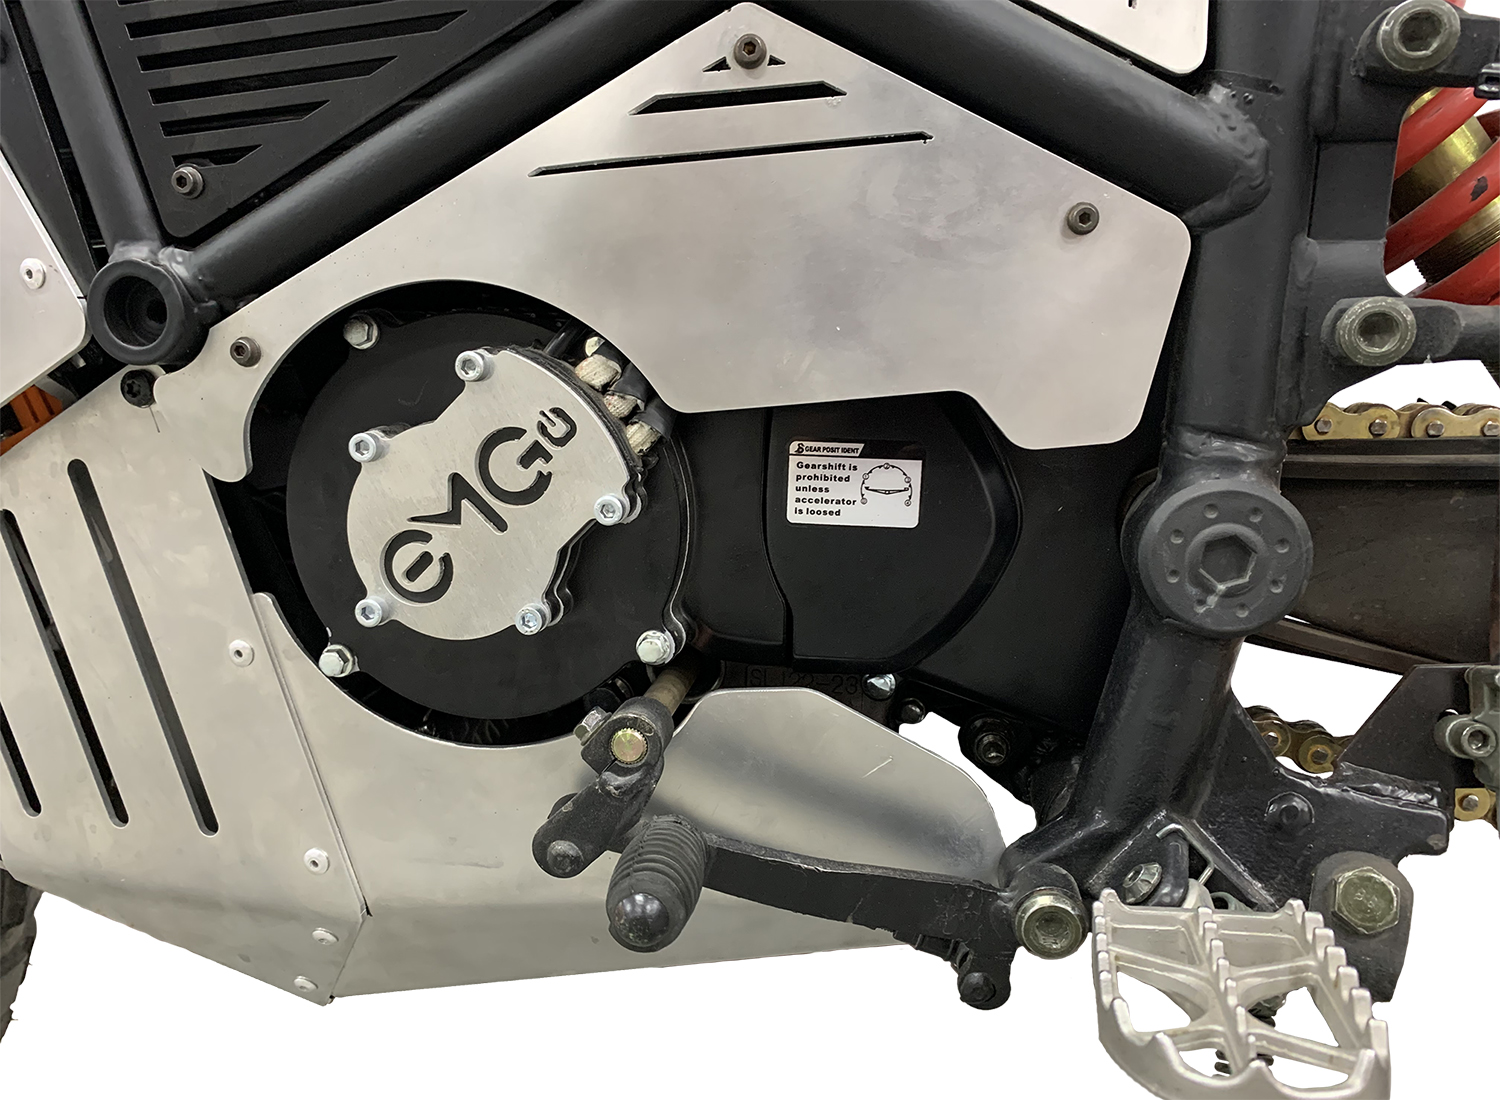 A view of the battery and motor area on the ScrAmper - an electric motorcycle from Ukranian brand EMGo, capable of using an electric car charger